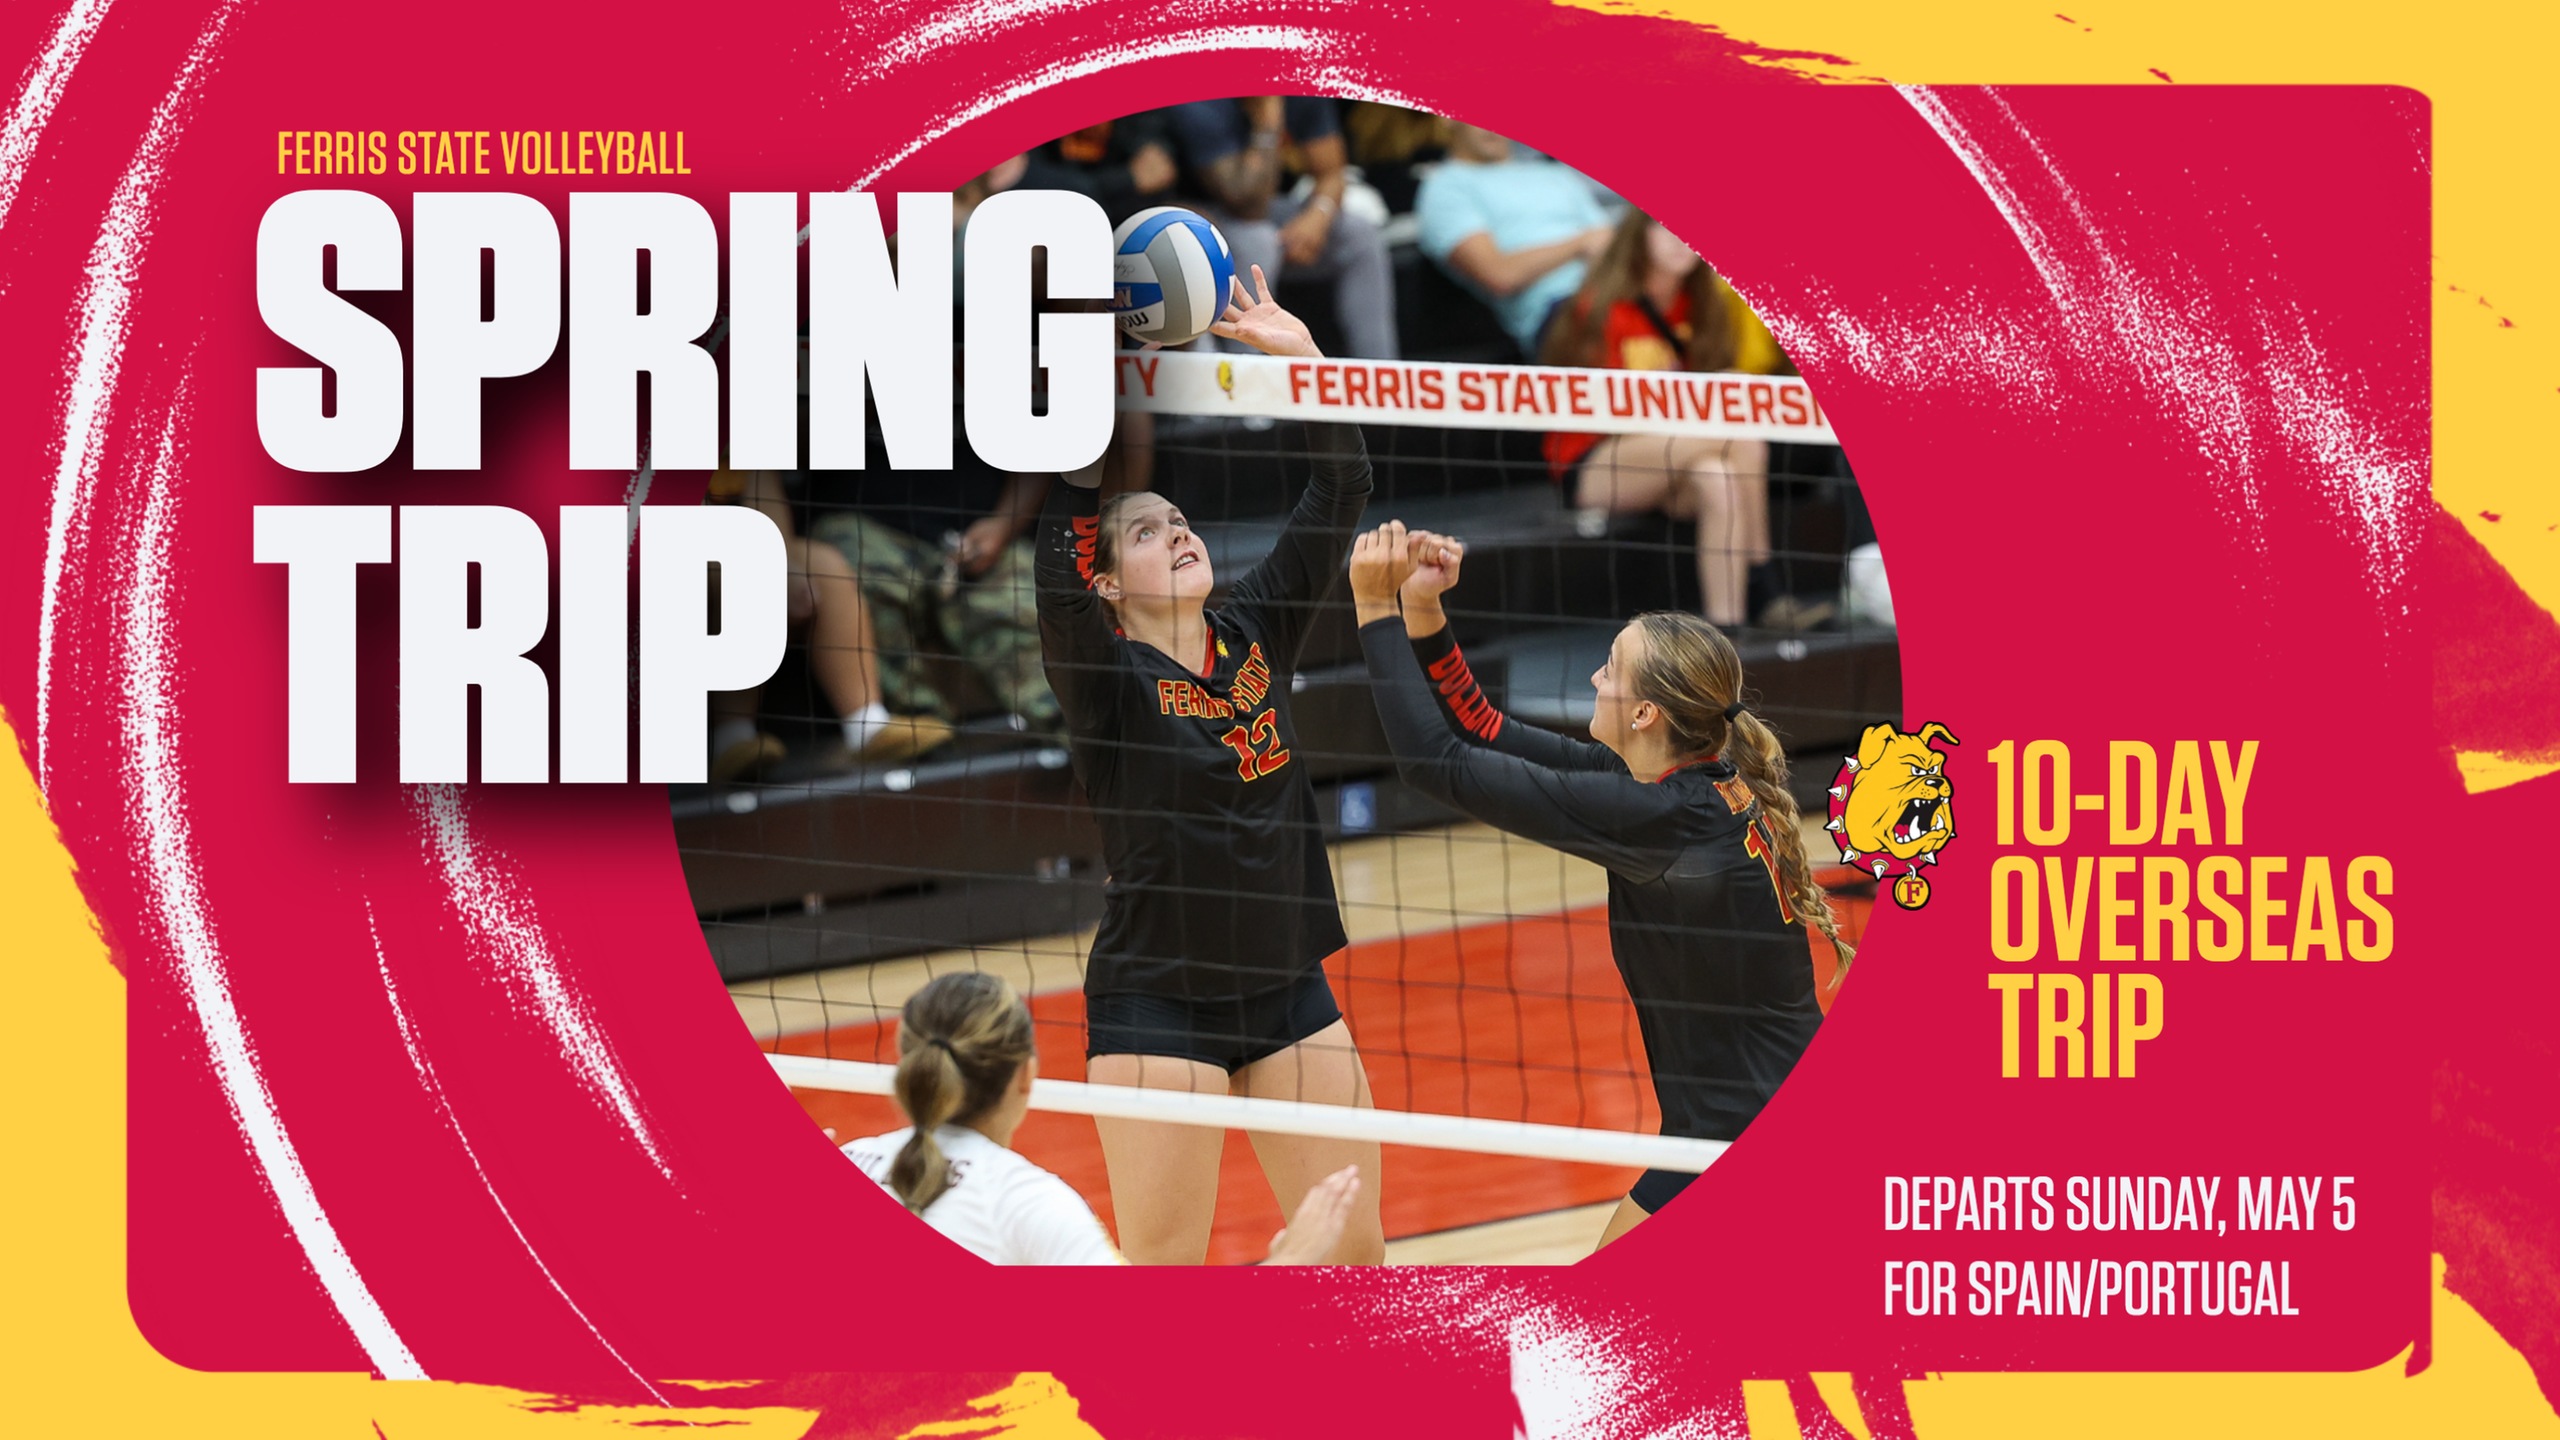 Ferris State Volleyball Departs For 10-Day Overseas Trip This Sunday!